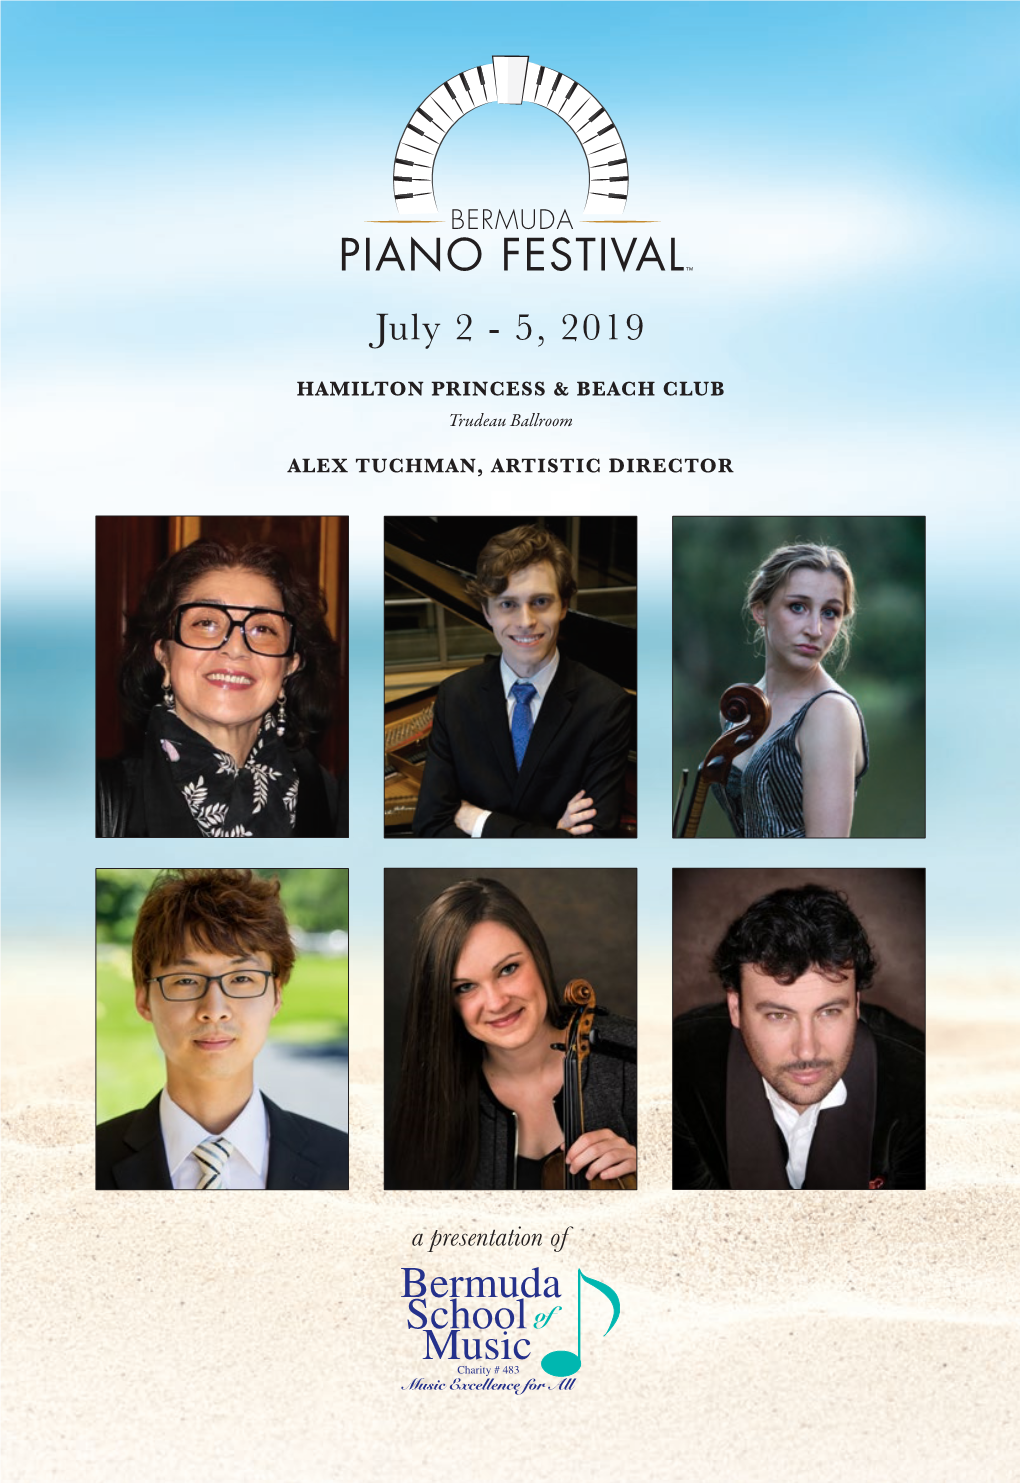 Bermuda Piano Festival! We Are Excited to Present Three Concerts Which Showcase the Remarkable Richness of the Russian Piano Repertoire